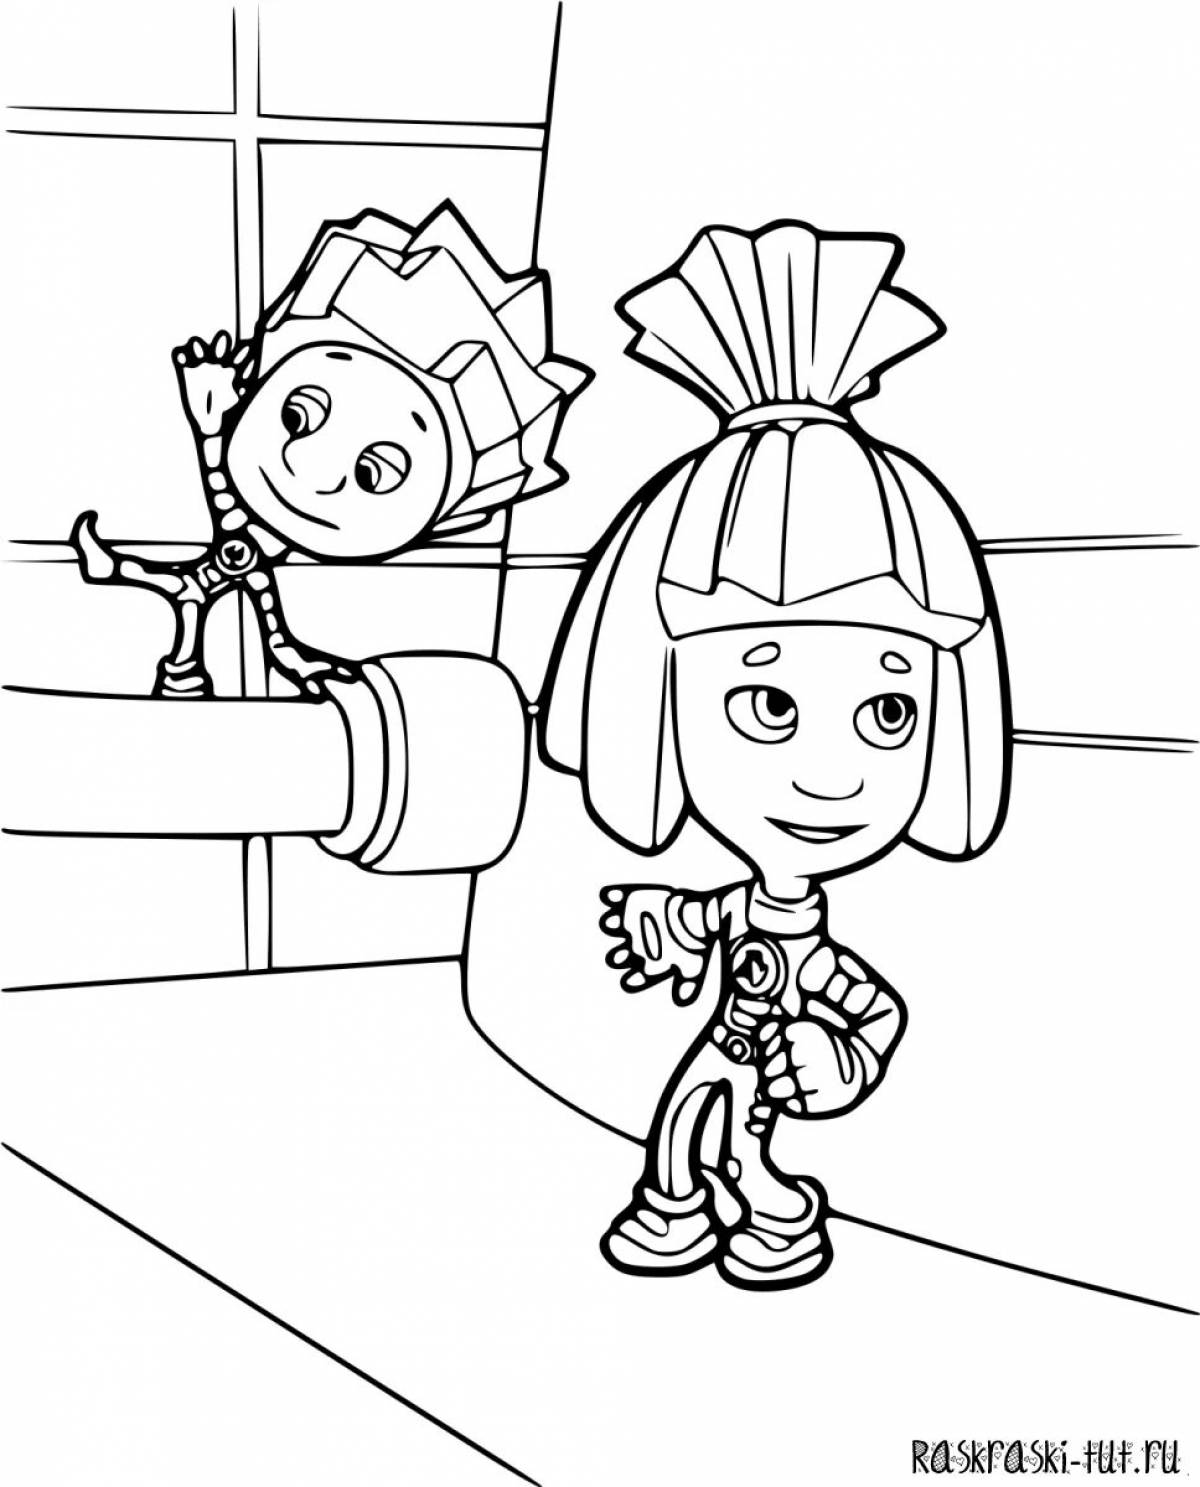 Inspirational coloring page turn on